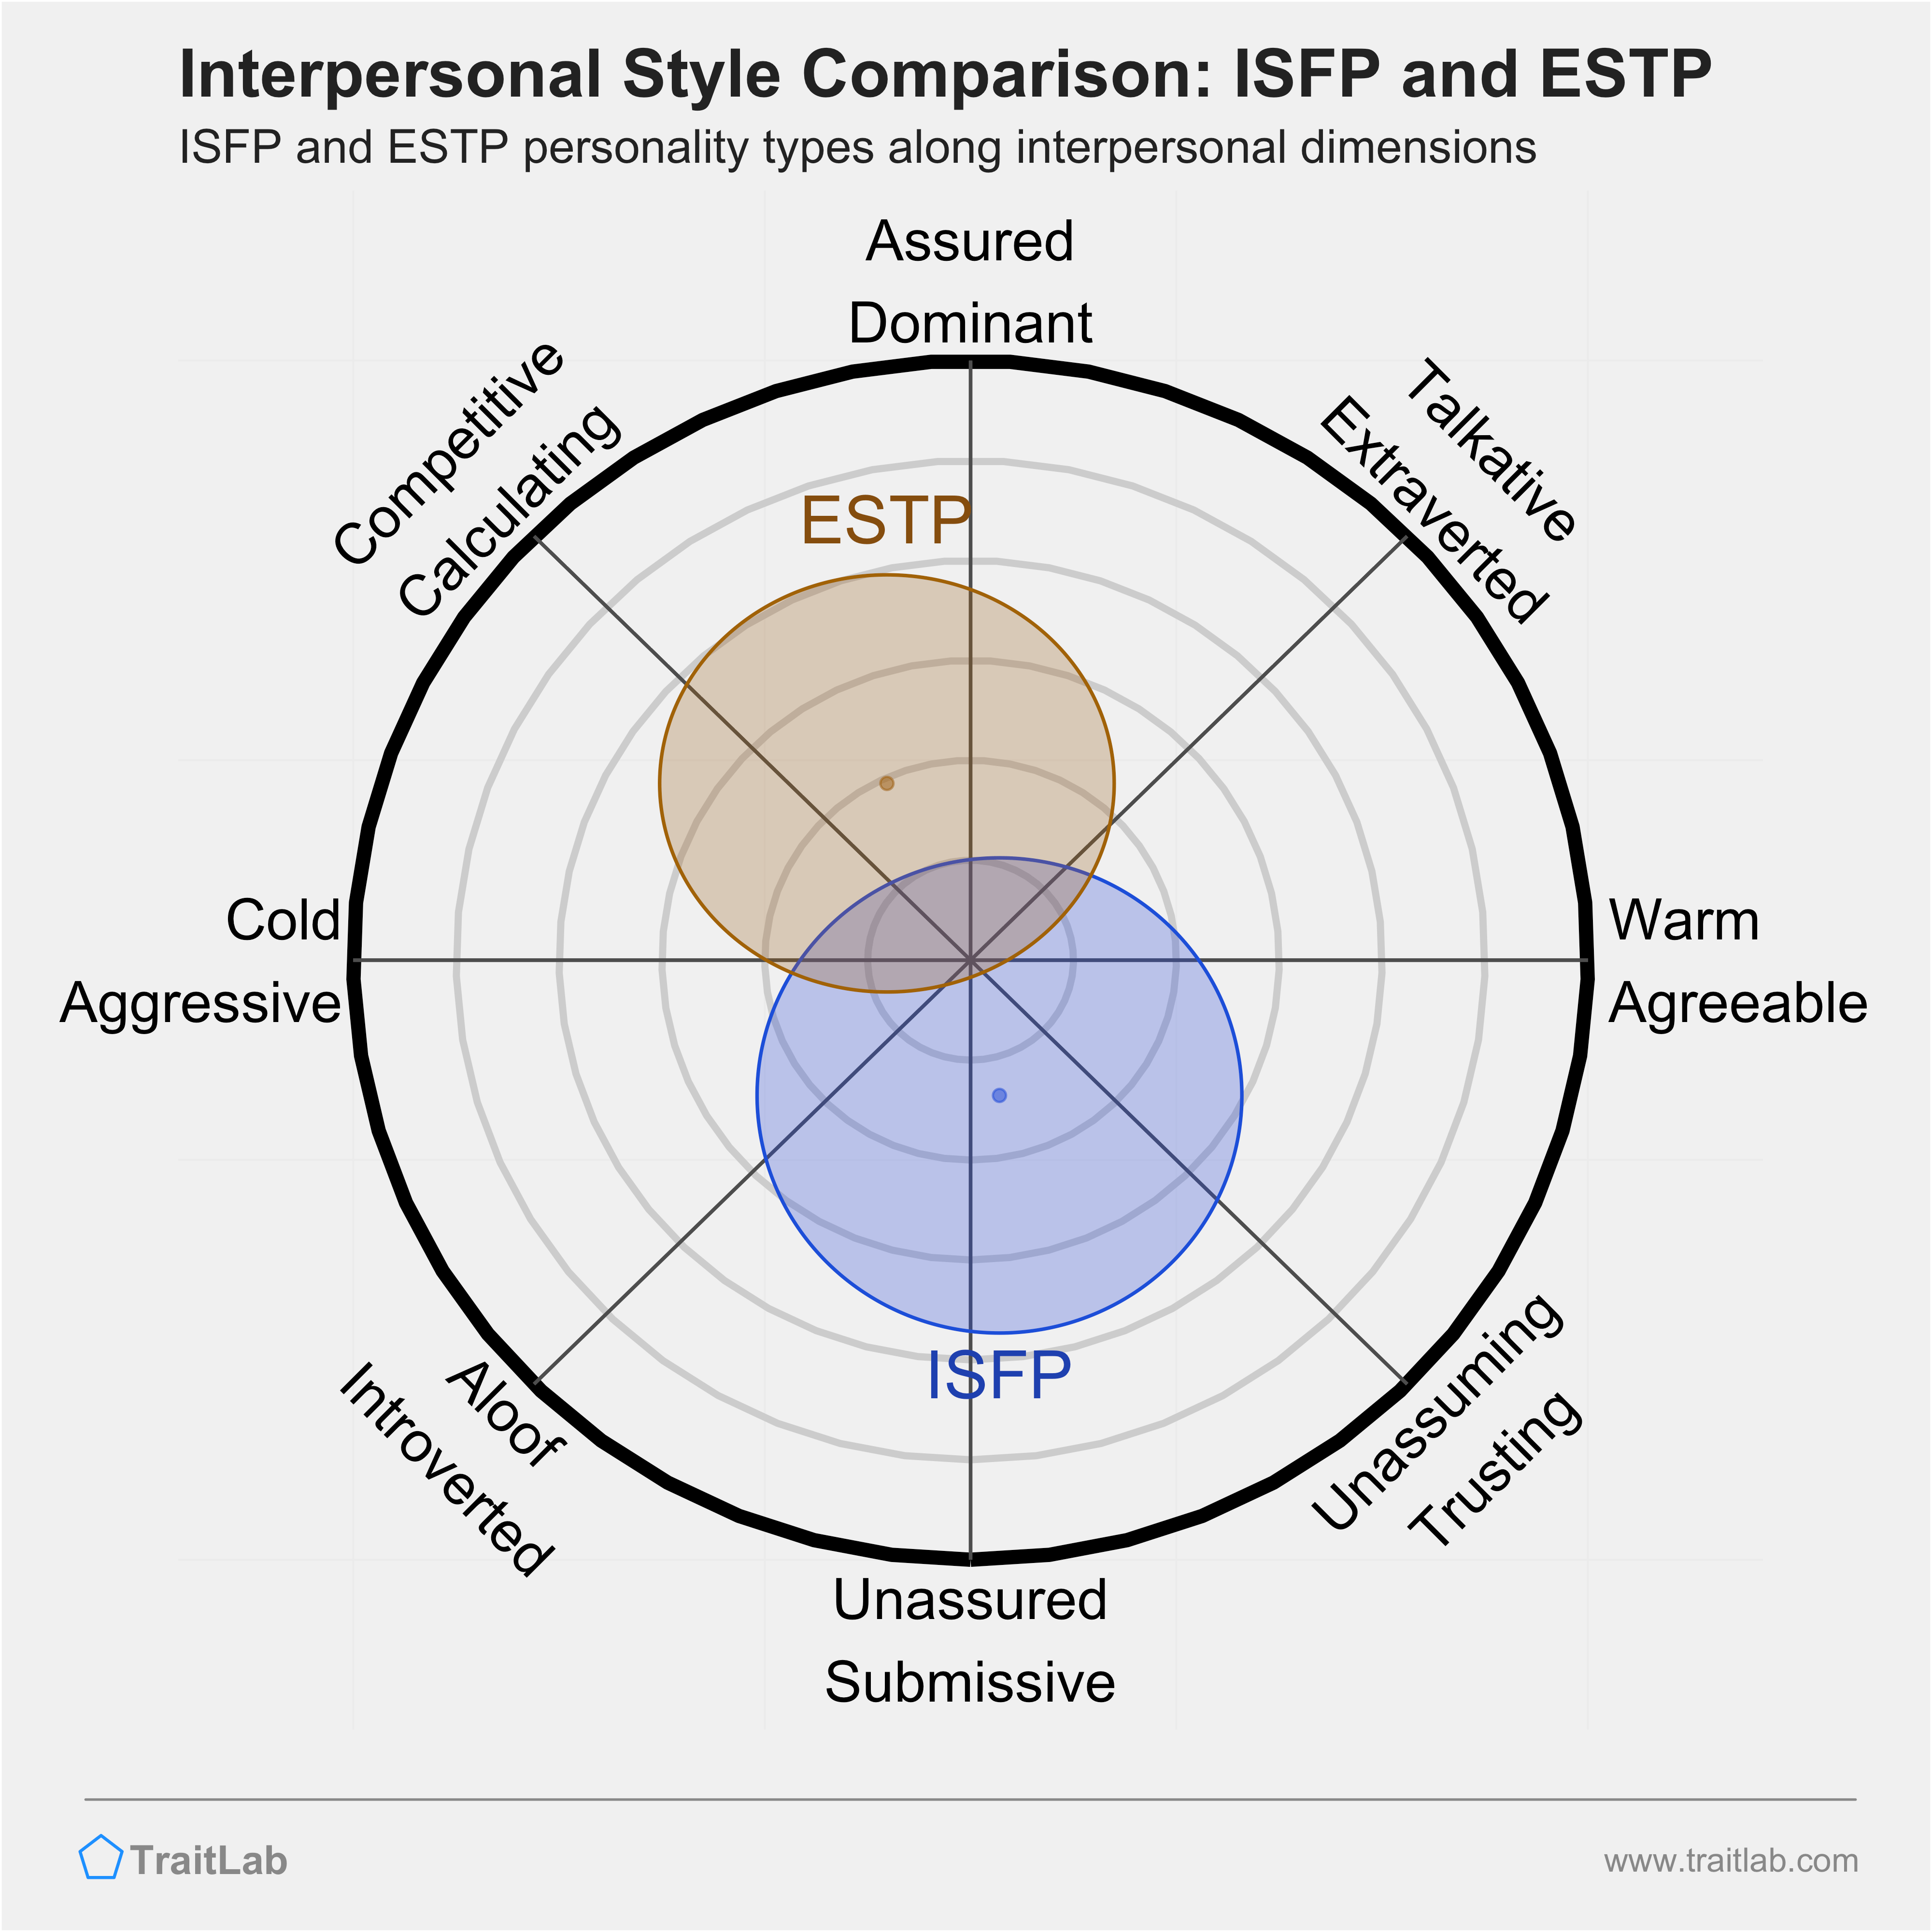 ISFP and ESTP comparison across interpersonal dimensions